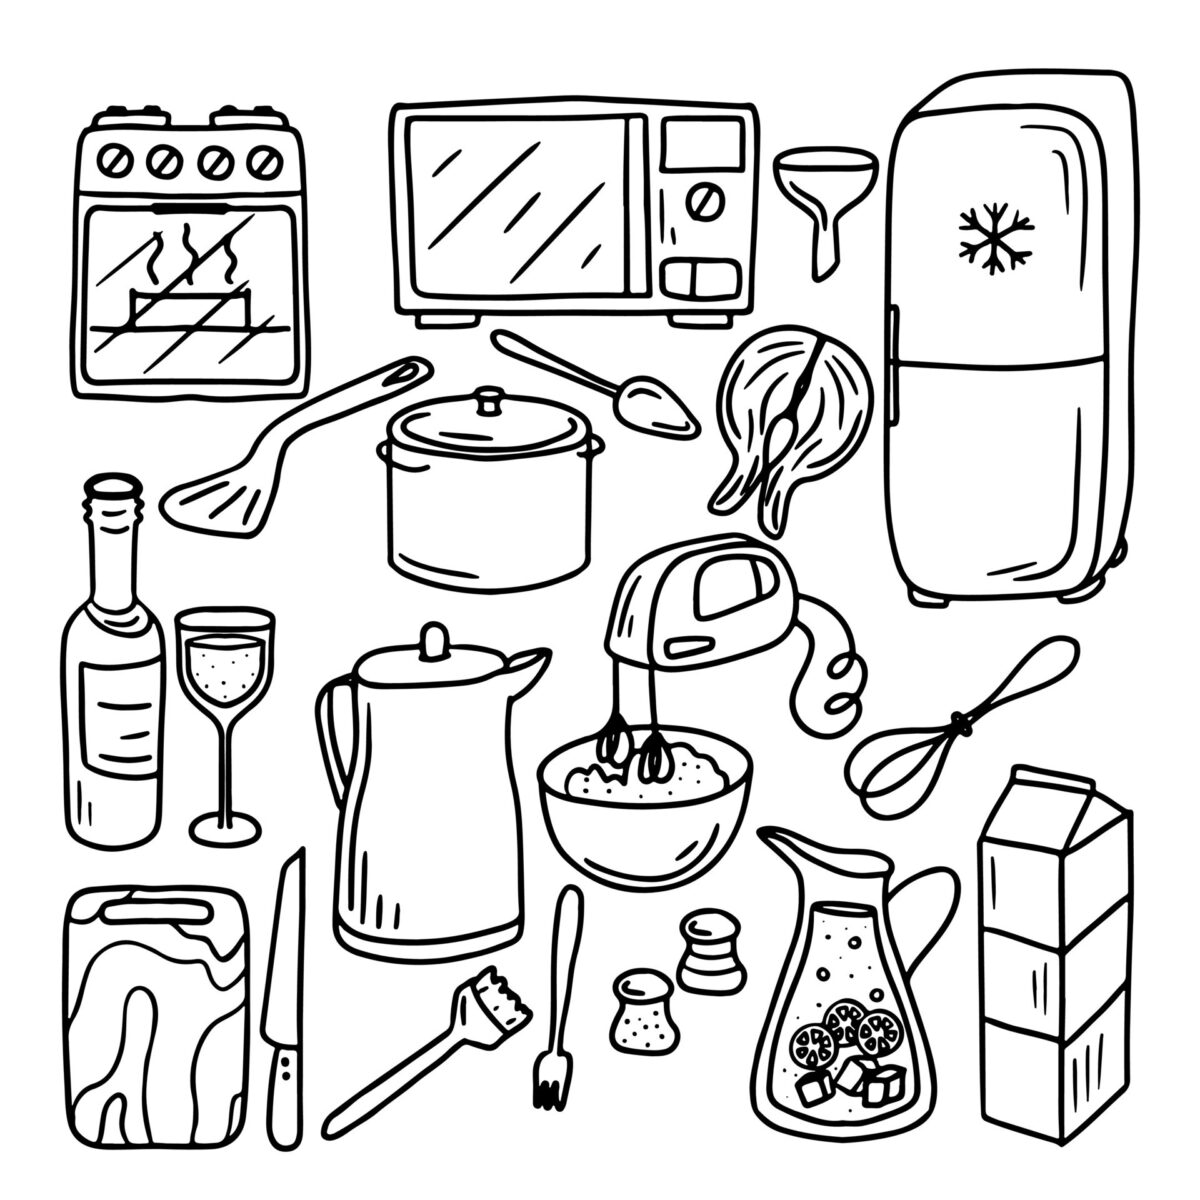 set-of-doodle-kitchen-tools-doodle-kitchen-equipments-illustration-isolated-on-white-background-perfect-for-wallpaper-pattern-fills-textile-etc-vector